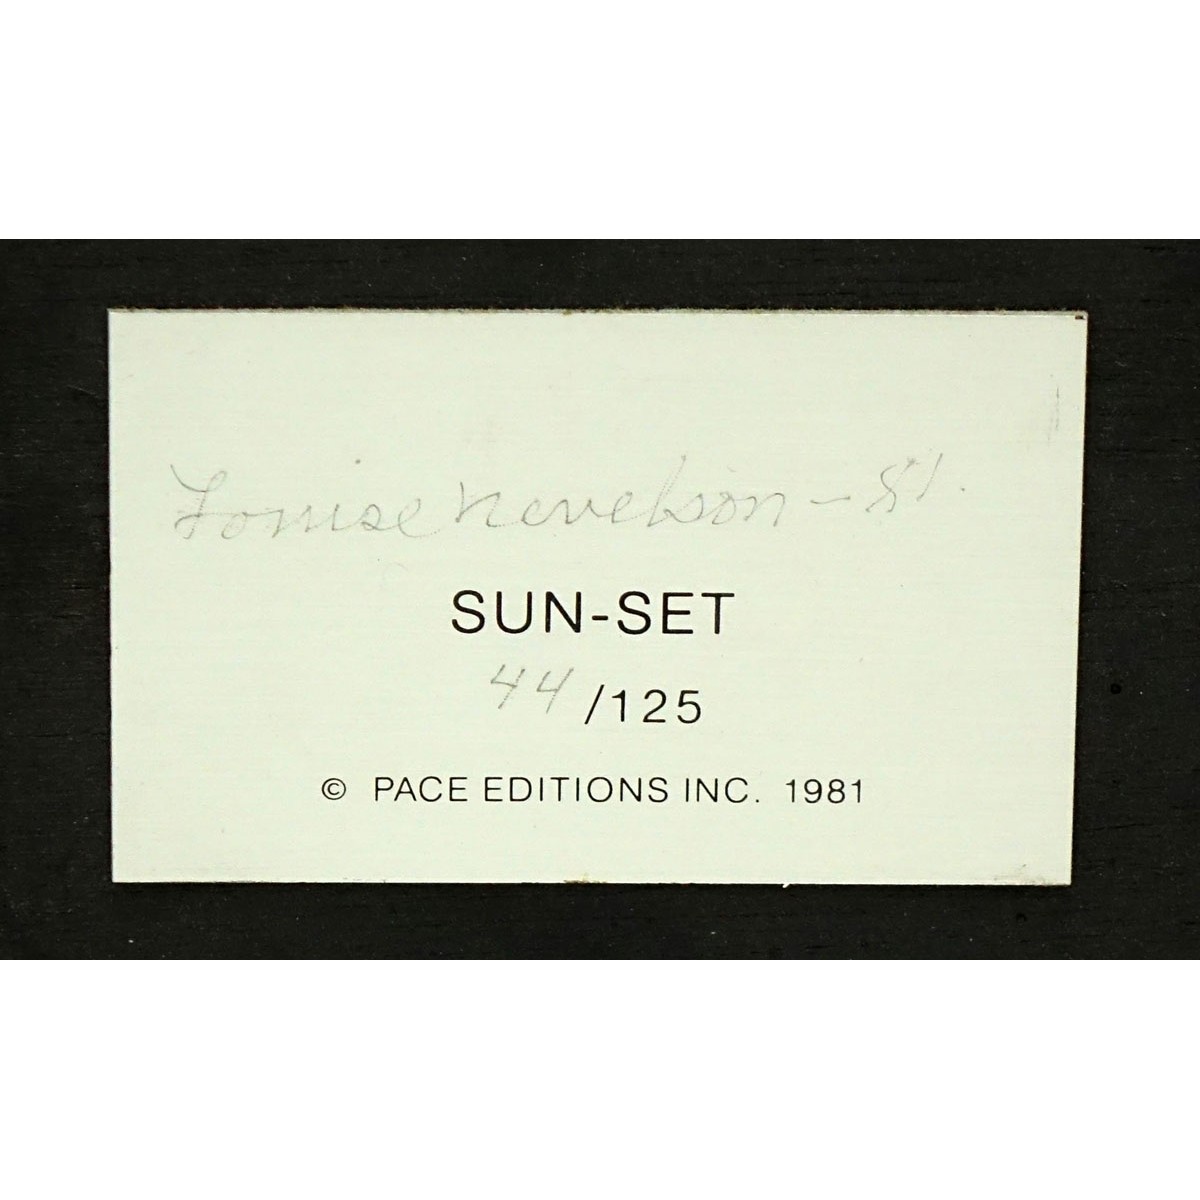 Louise Nevelson, Russian/American (1899 - 1988) Cast polyester resin "Sun-Set, 1981" Tag signed and numbered 44/125 en verso. Published by Pace Editions Inc.